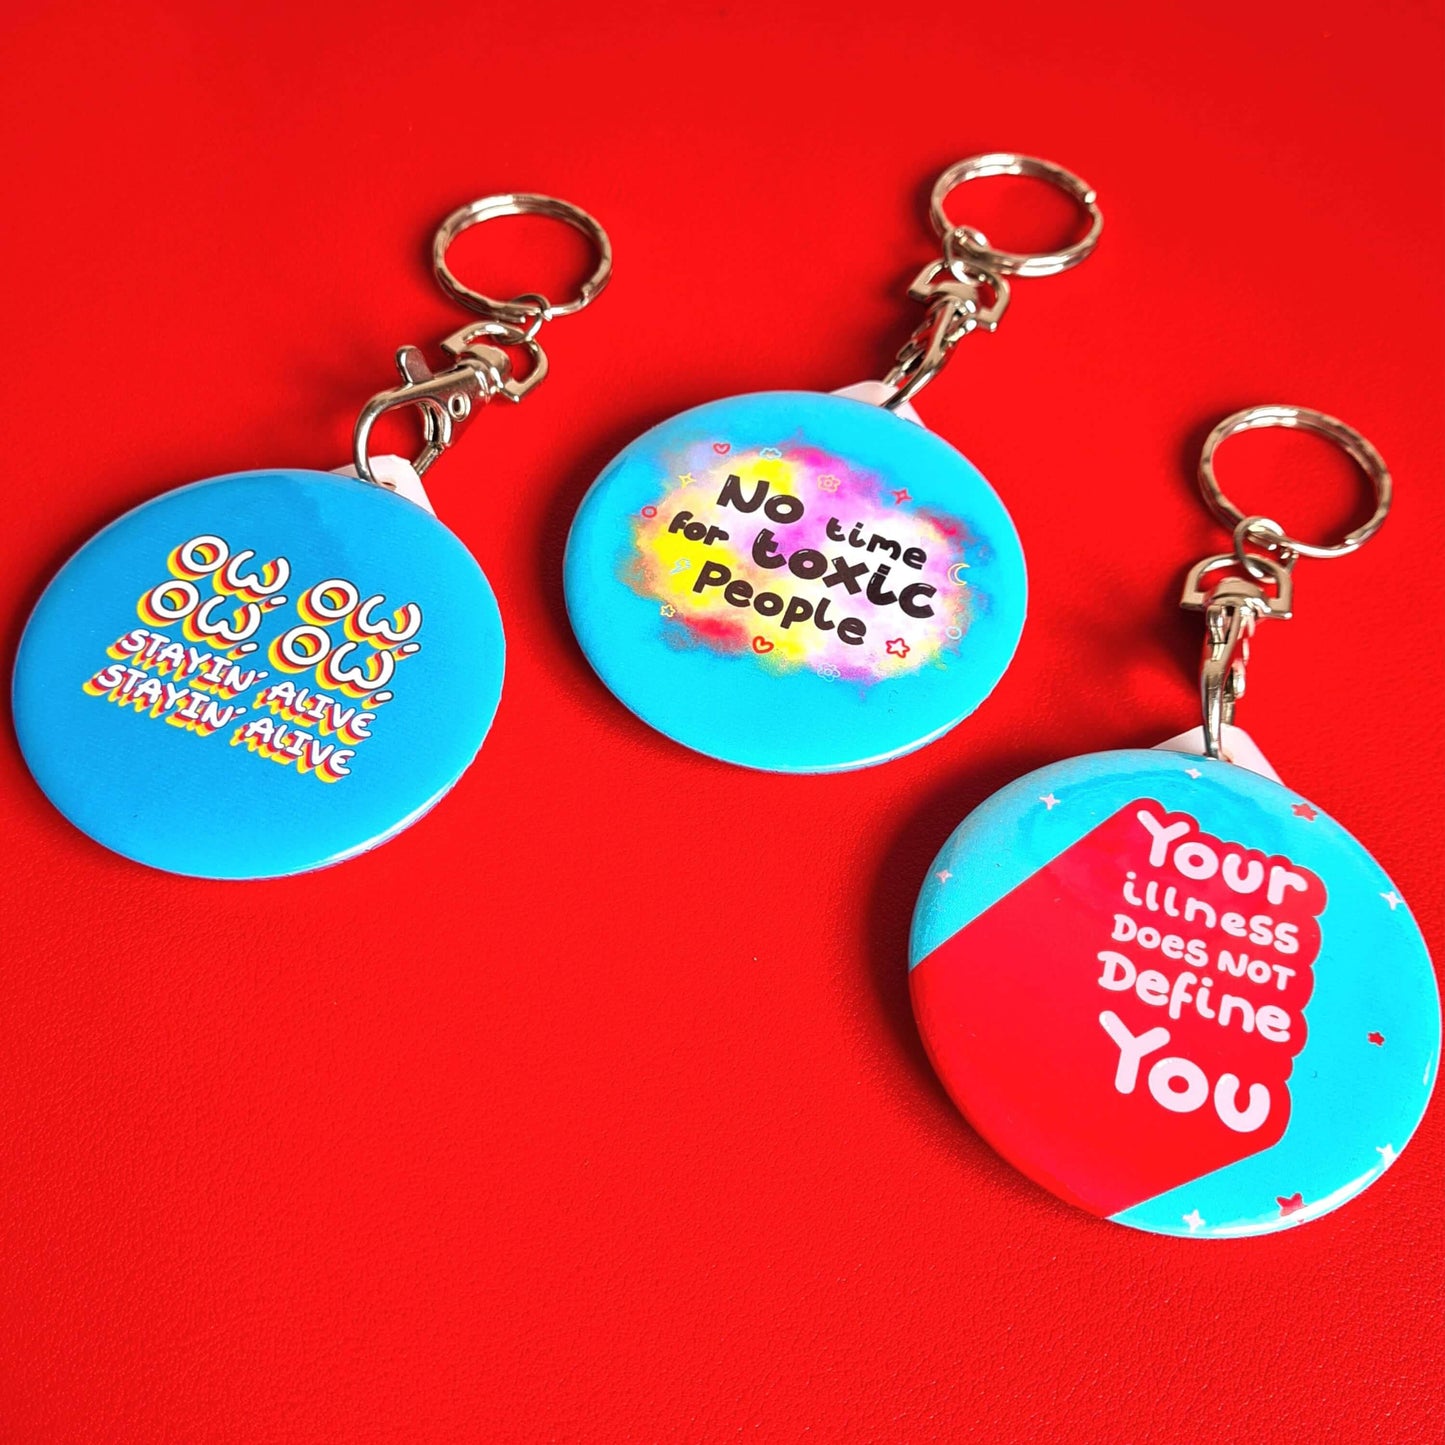 The Your Illness Does NOT Define You Keyring on a red background with other innabox keychains. The silver clip blue plastic circular keyring has red and white sparkles and text reading 'your illness does not define you'. A hand drawn design raising awareness for invisible illnesses.